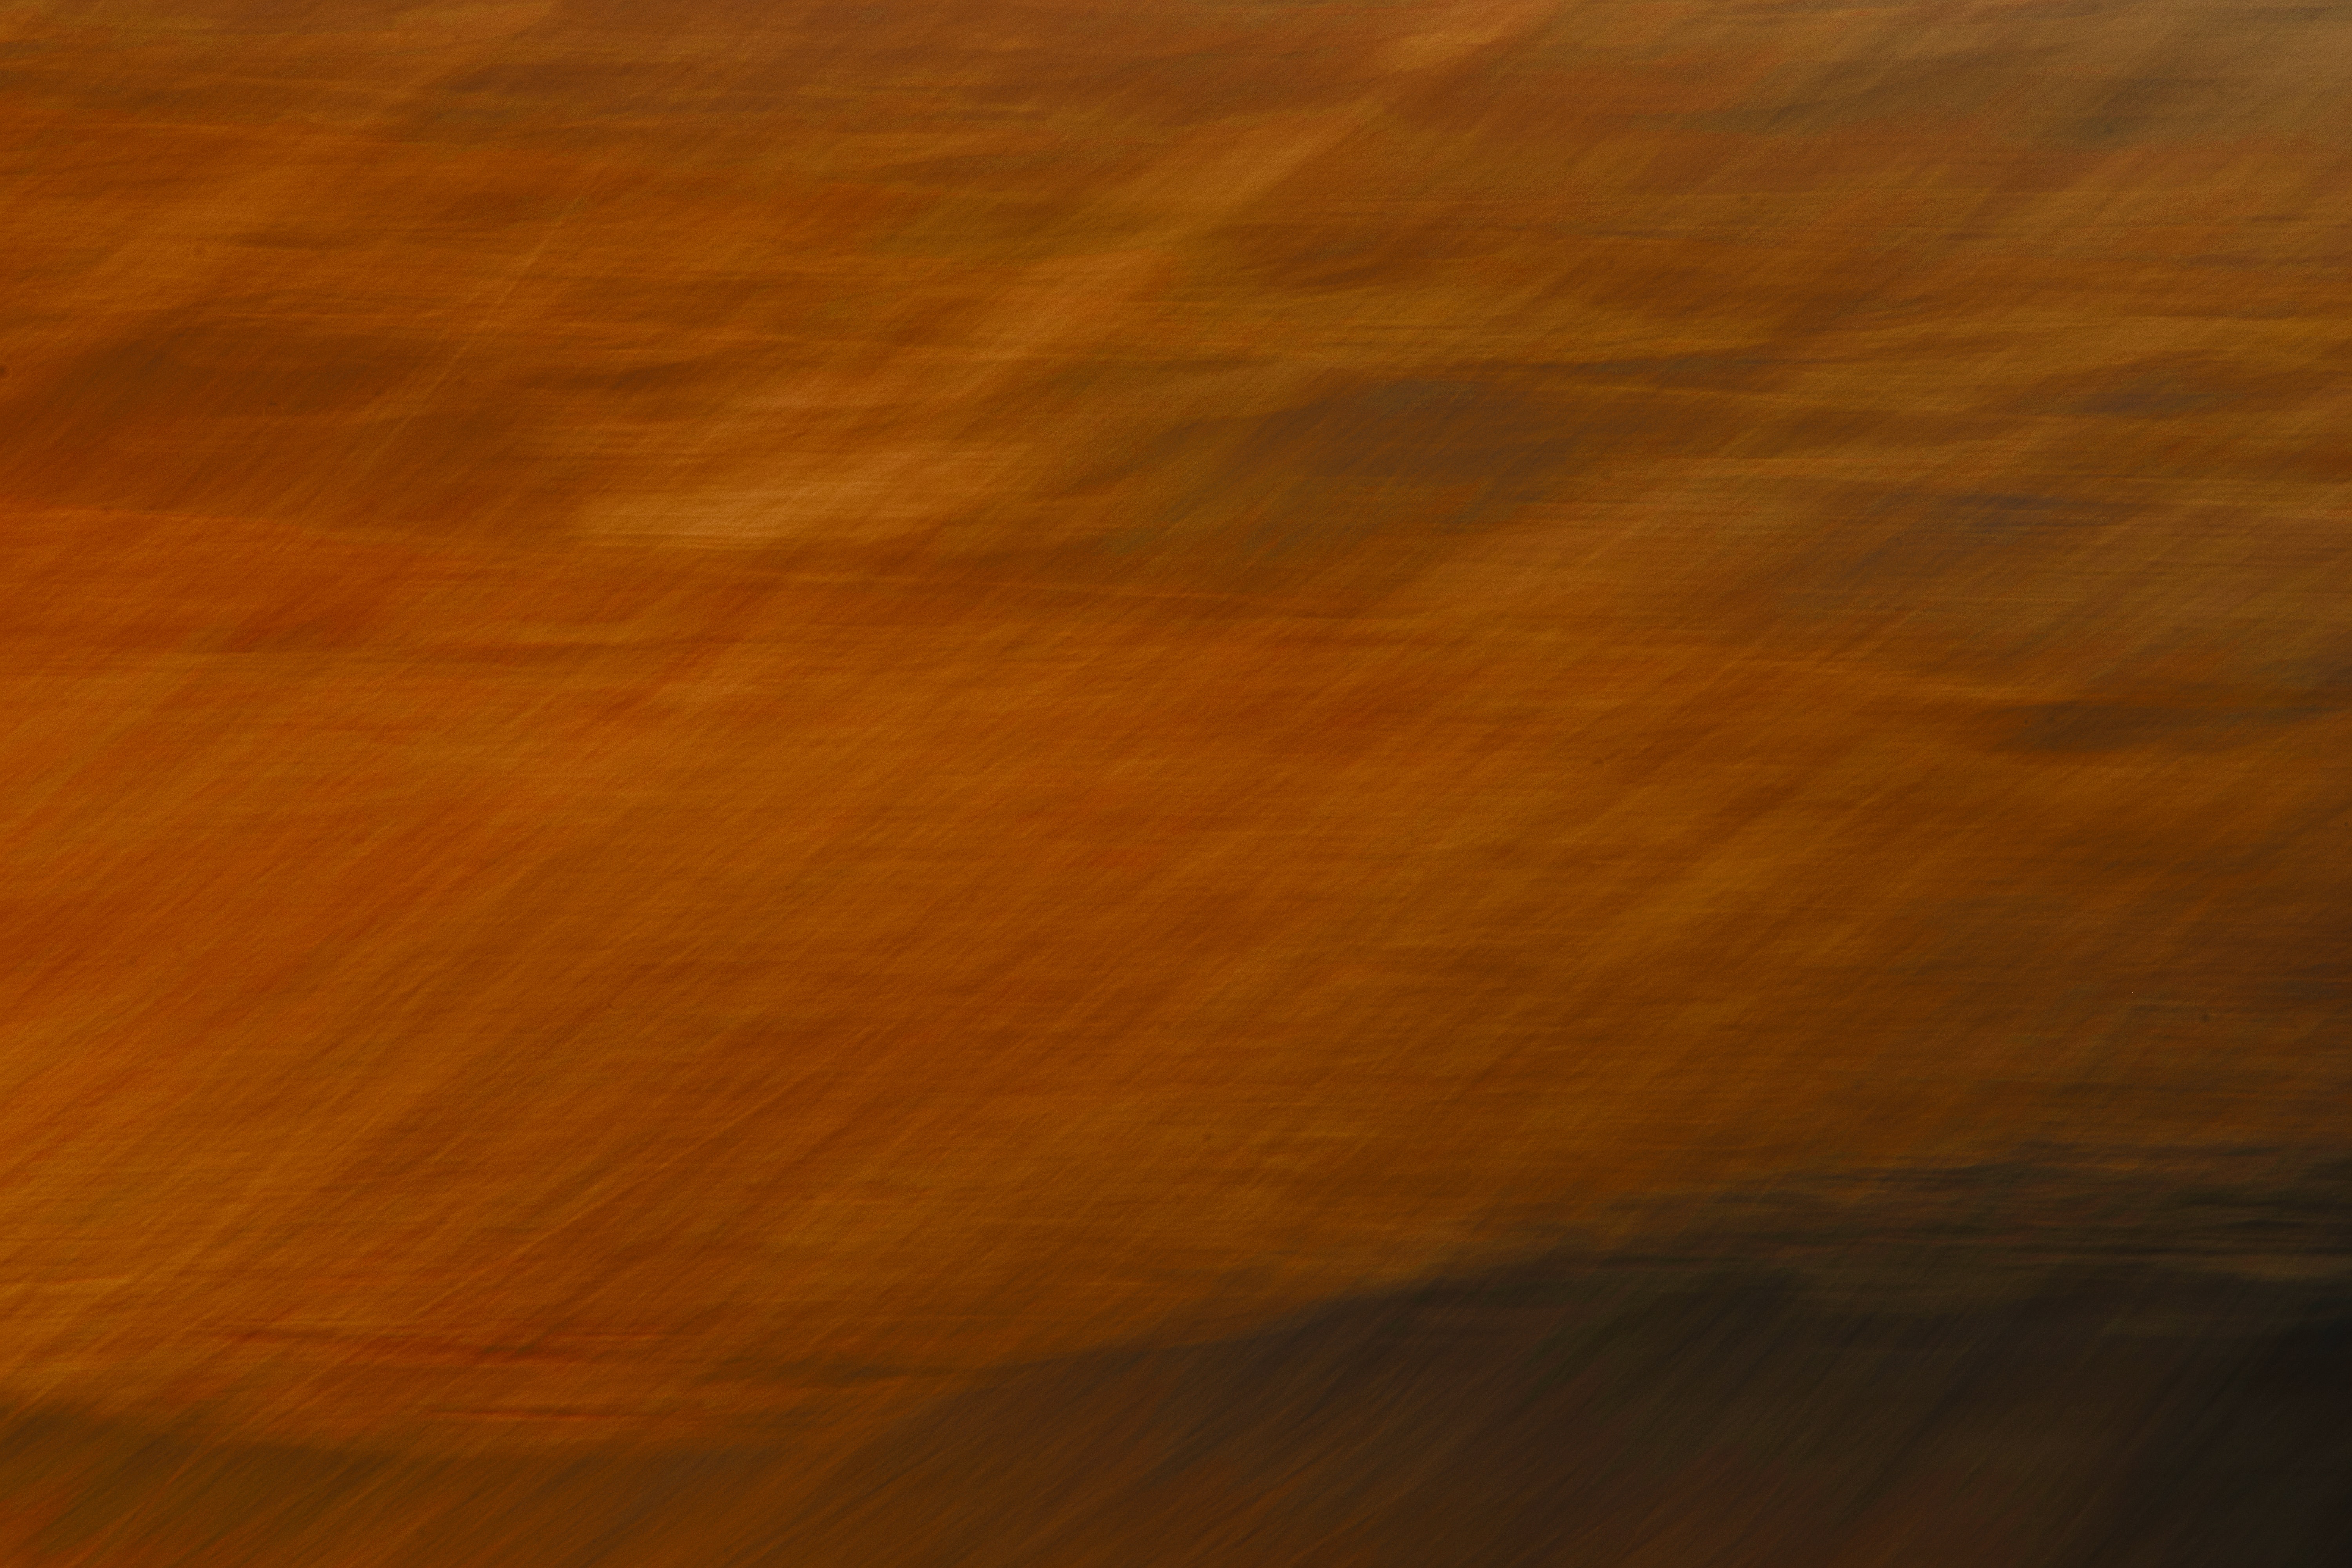 brown, blur, background, abstract, smooth cell phone wallpapers